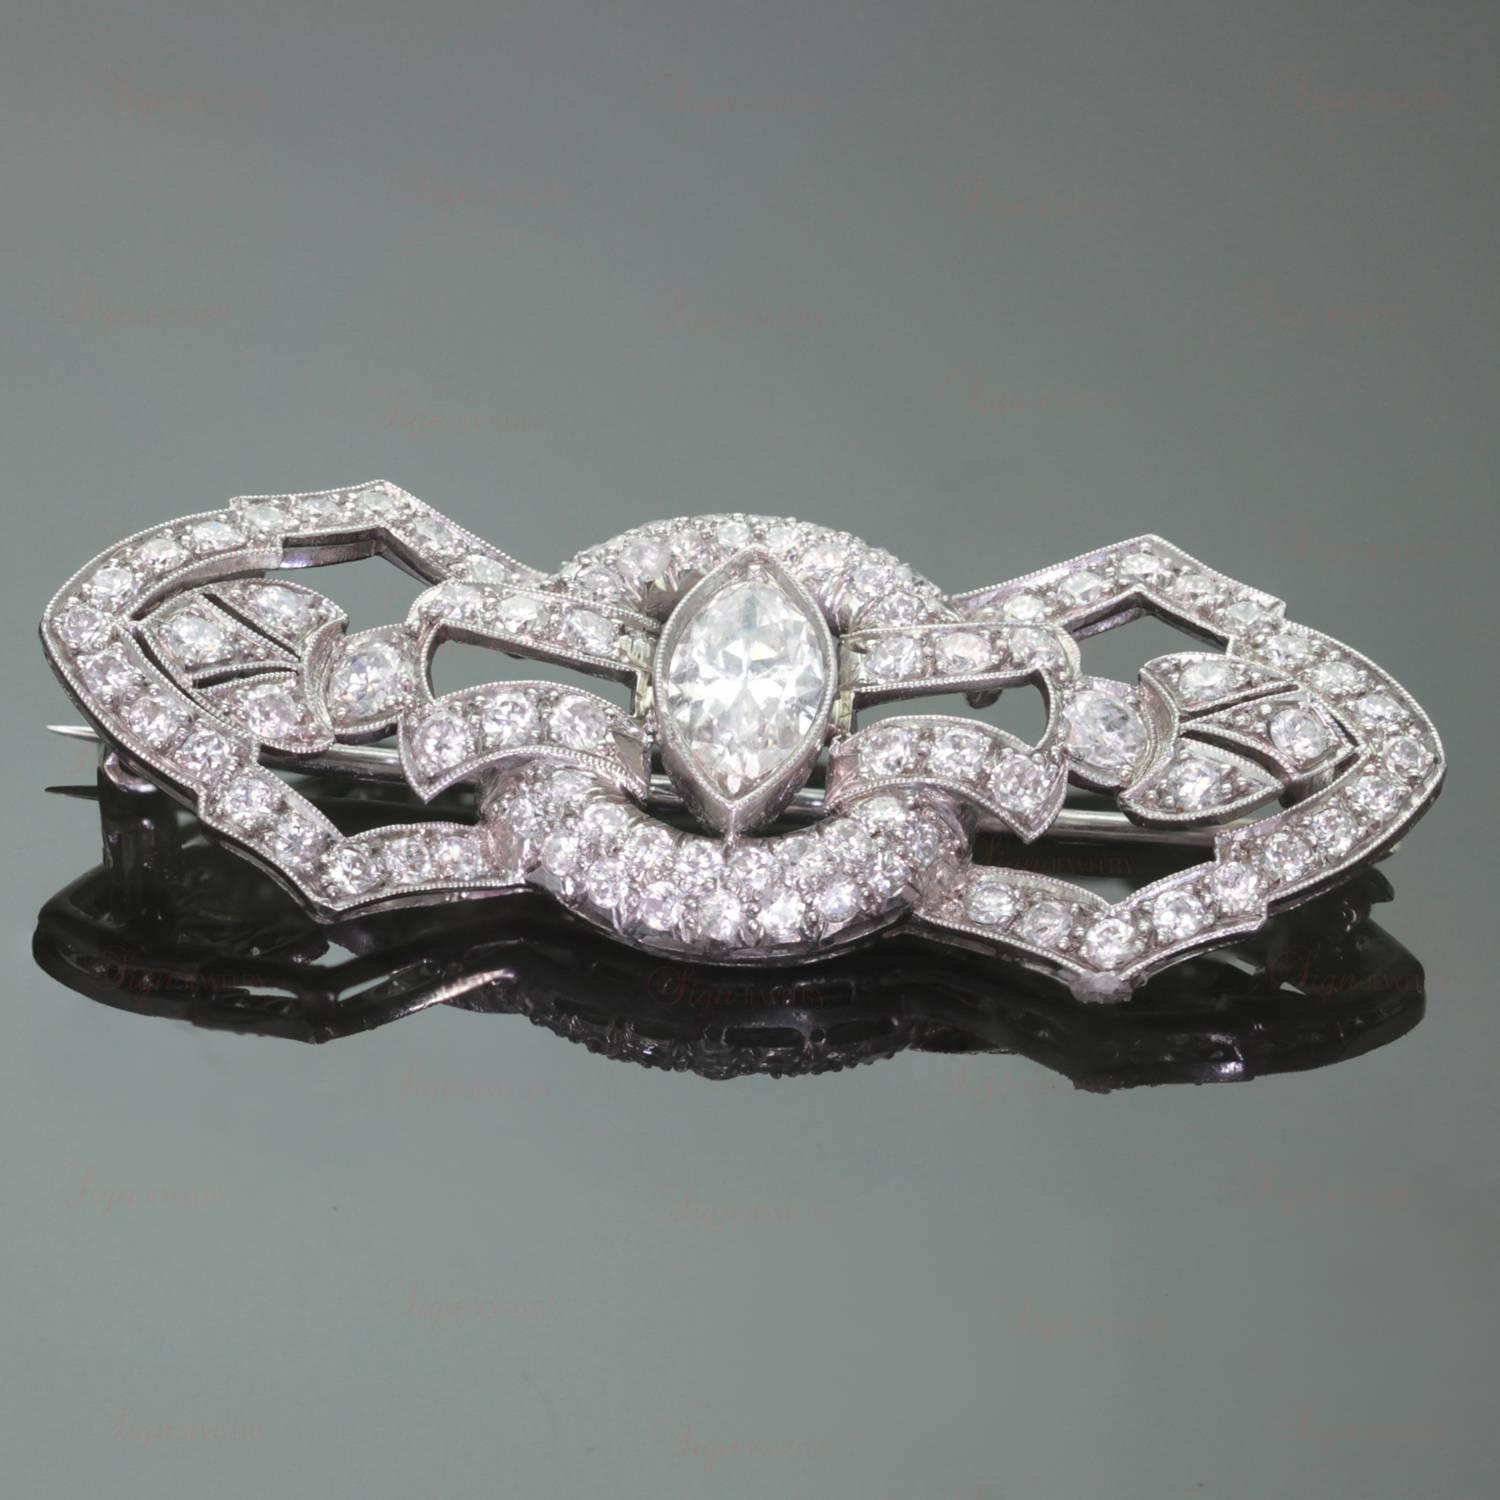 This stunning Art-Deco brooch is hand-made in platinum and features a filigree design with a very clean and white marquise-cut diamond of approximately 1 carat in the center, surrounded by 89 old-cut diamonds of an estimated 2.25 carats. There is no